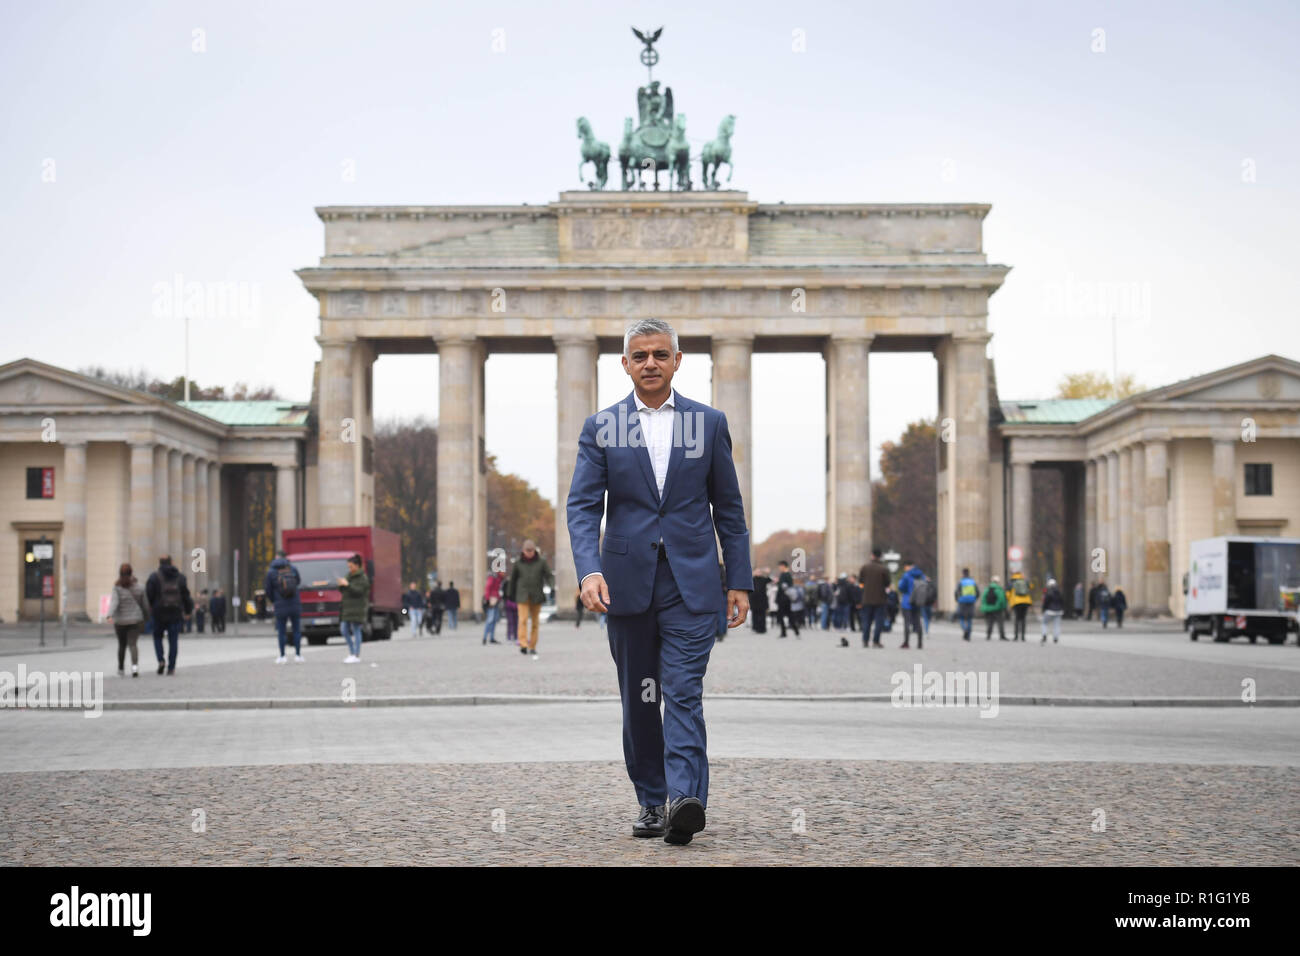 Mayor of London Sadiq Khan at the Brandenburg Gate in Berlin, Germany, during a three-day visit to European capitals where he will meet business leaders and politicians. Stock Photo